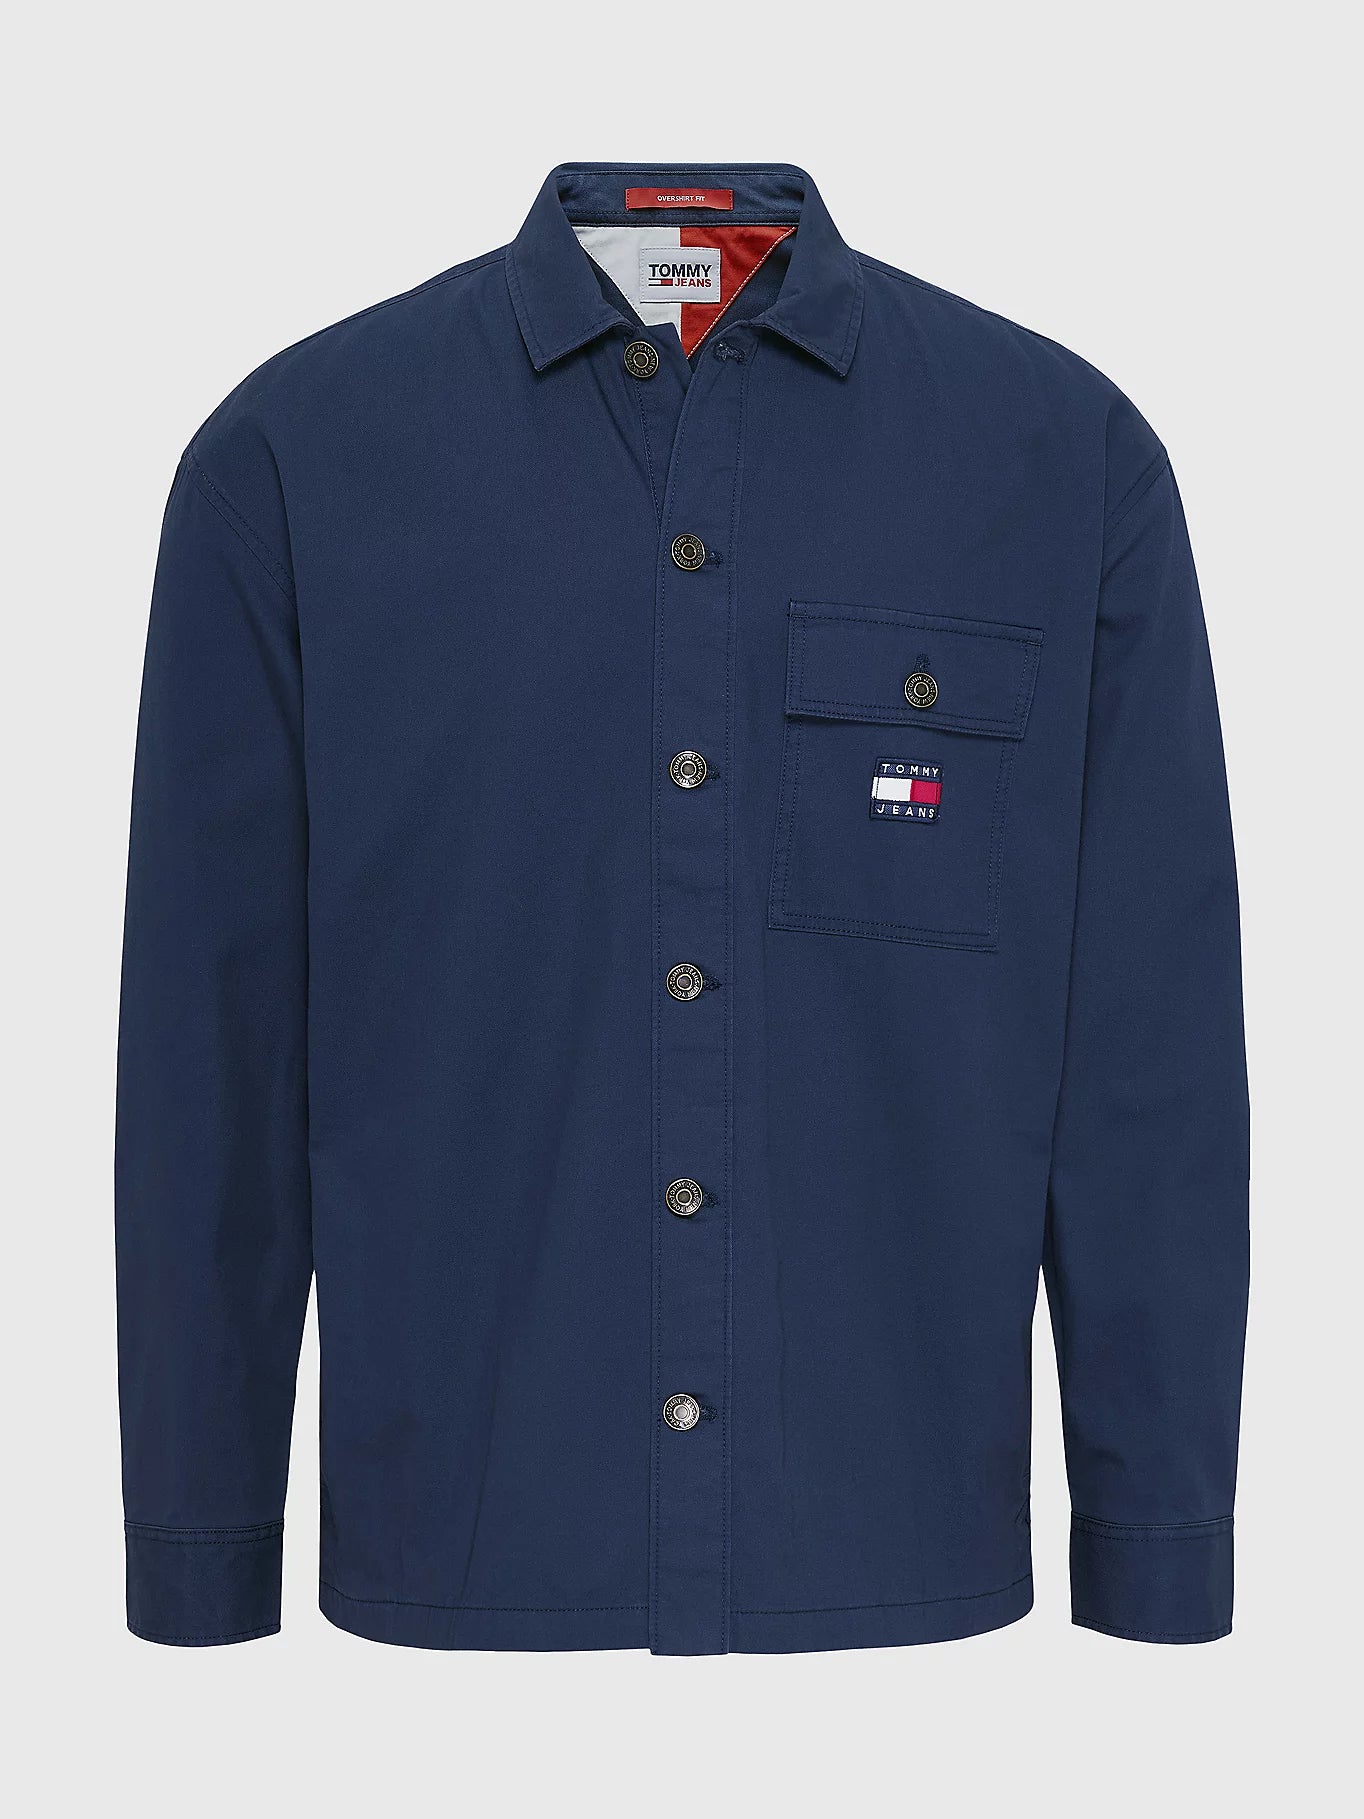 Chemise Tommy Jeans marine pour homme I Georgespaul